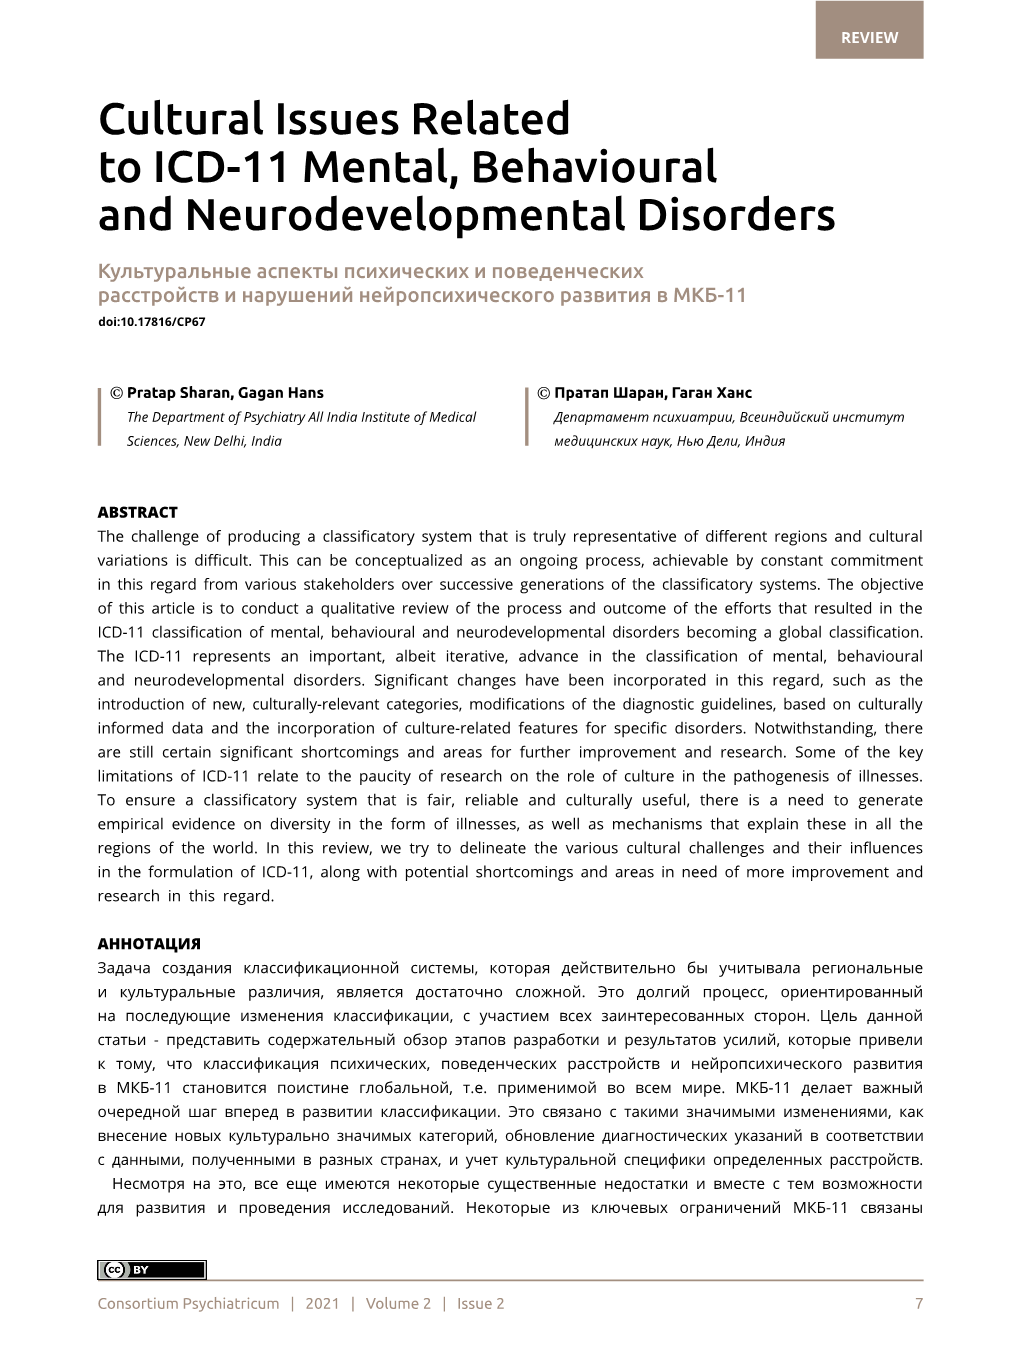 Cultural Issues Related to ICD-11 Mental, Behavioural and Neurodevelopmental Disorders